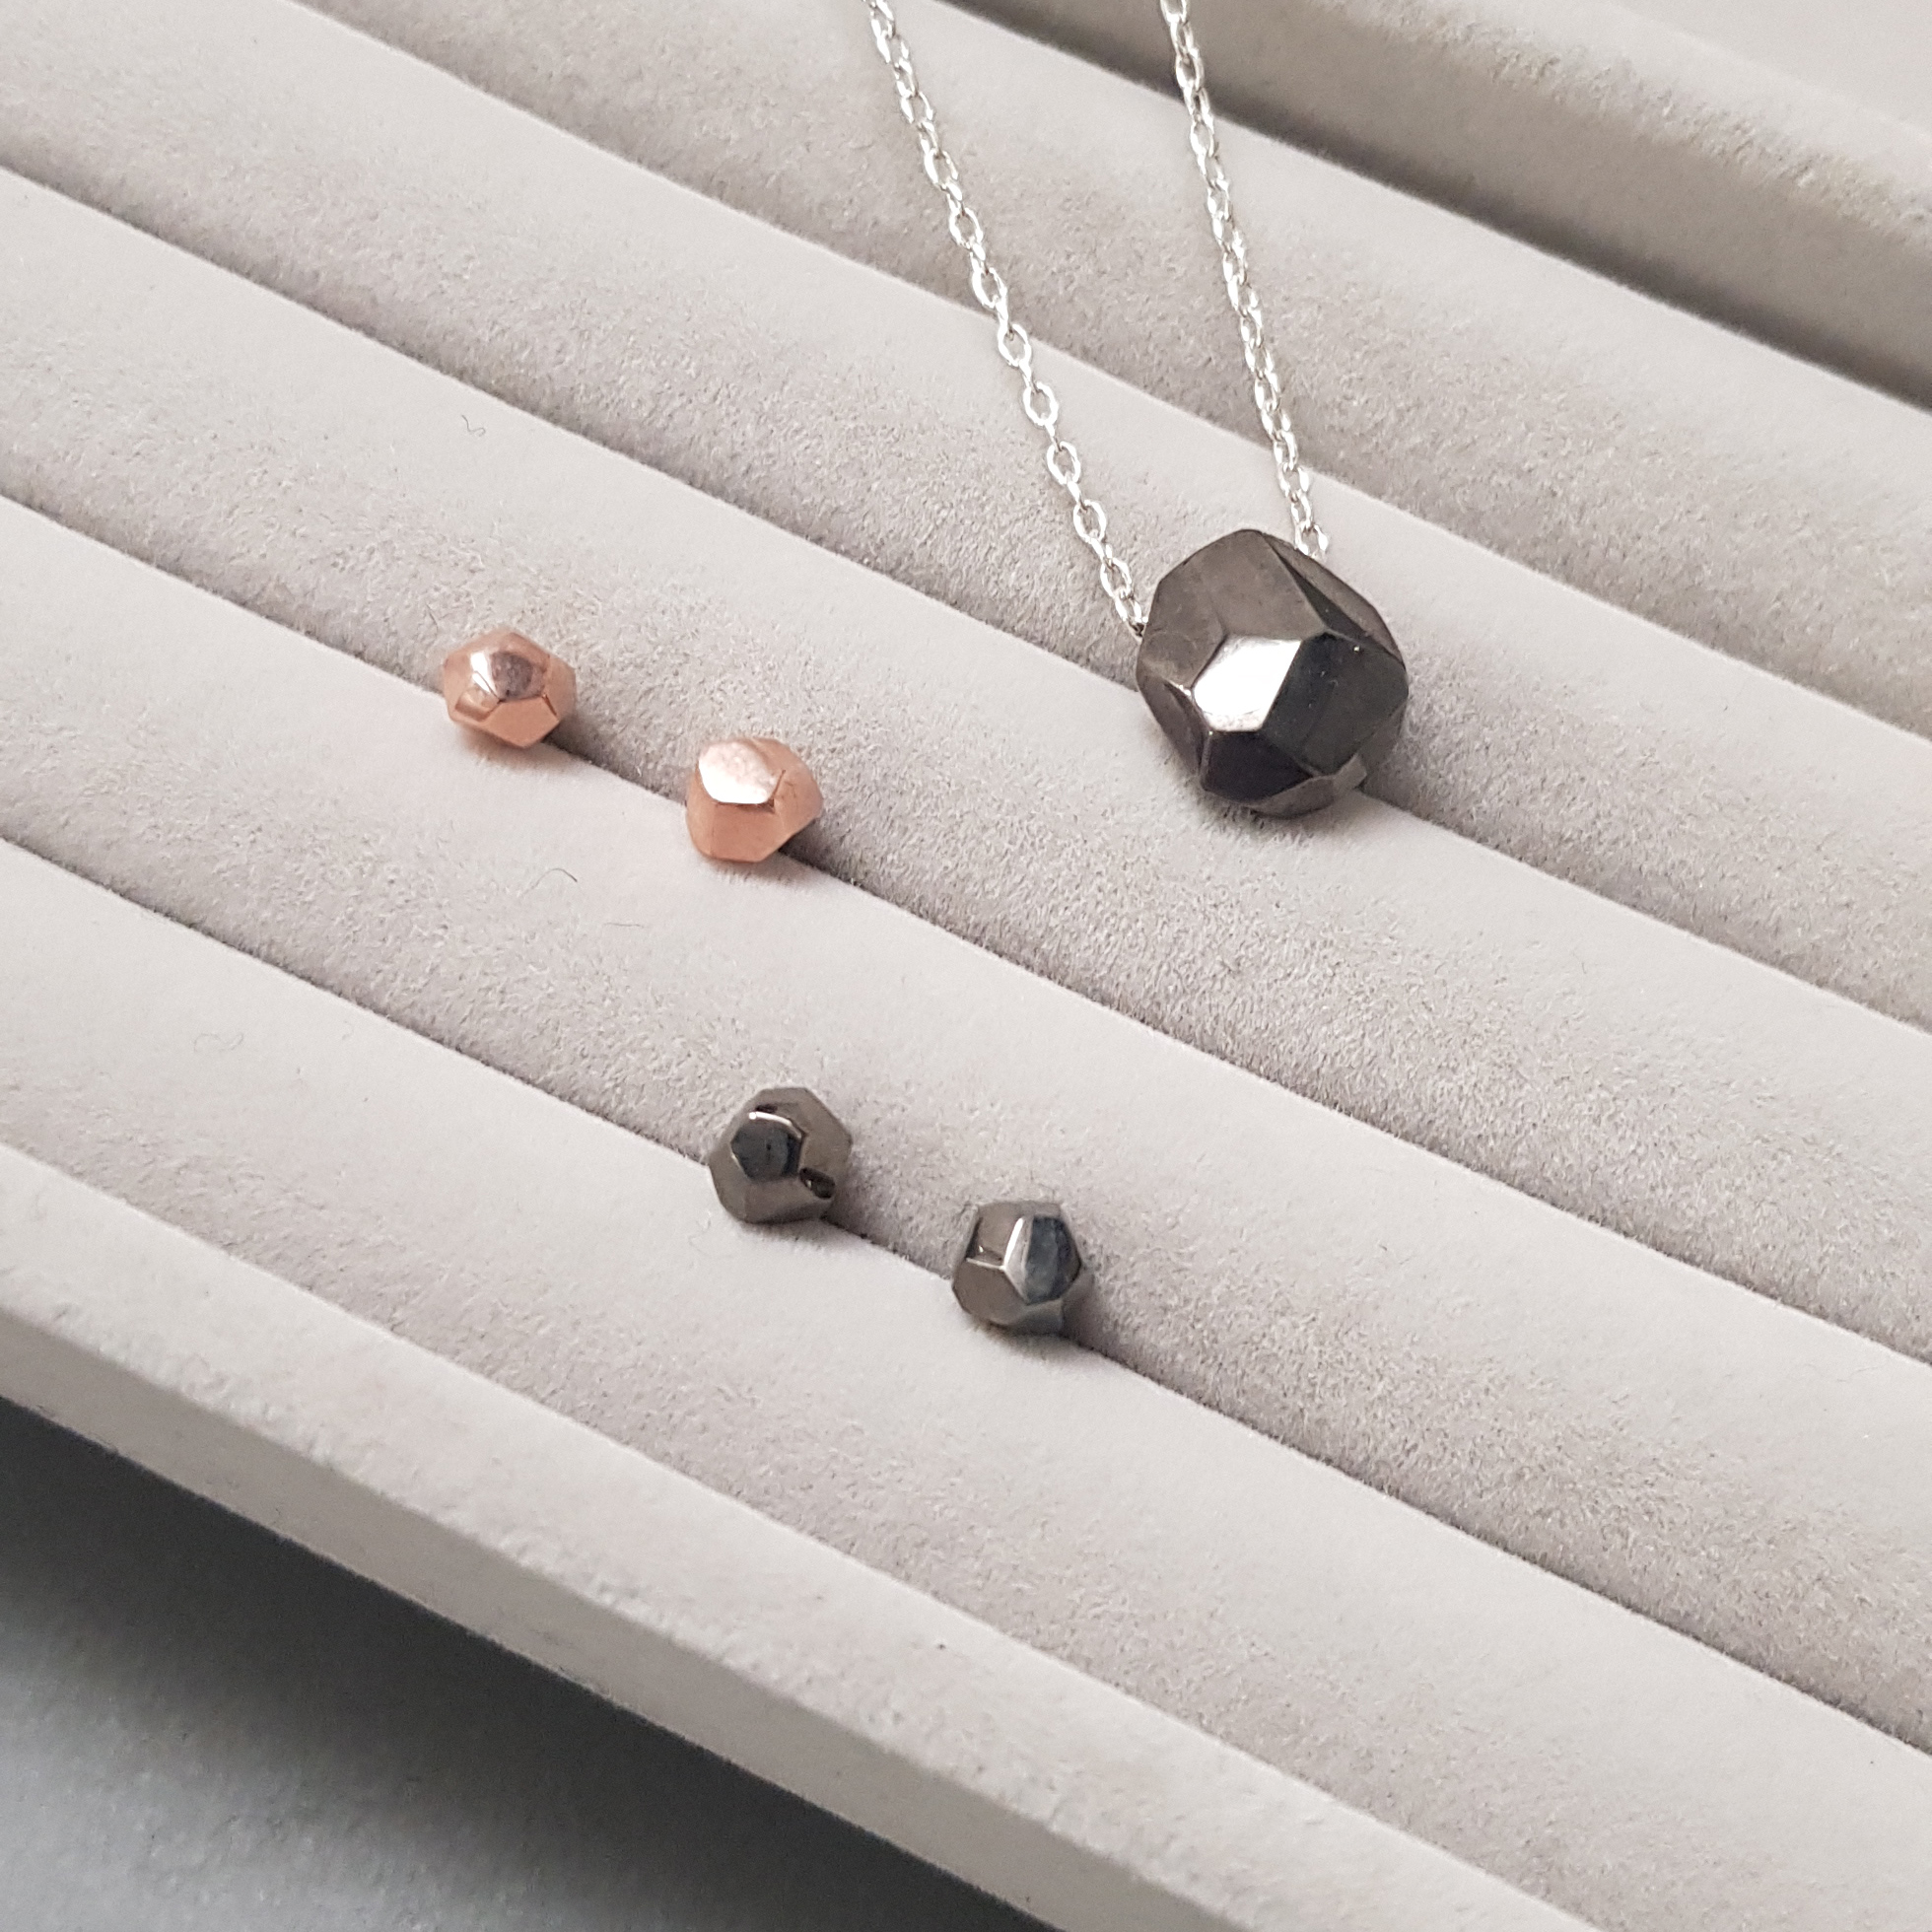 two pairs of asteroid shaped earrings, one rose gold and one black, next to a polished black asteroid shaped pendant on a silver chain, on a grey fabric background